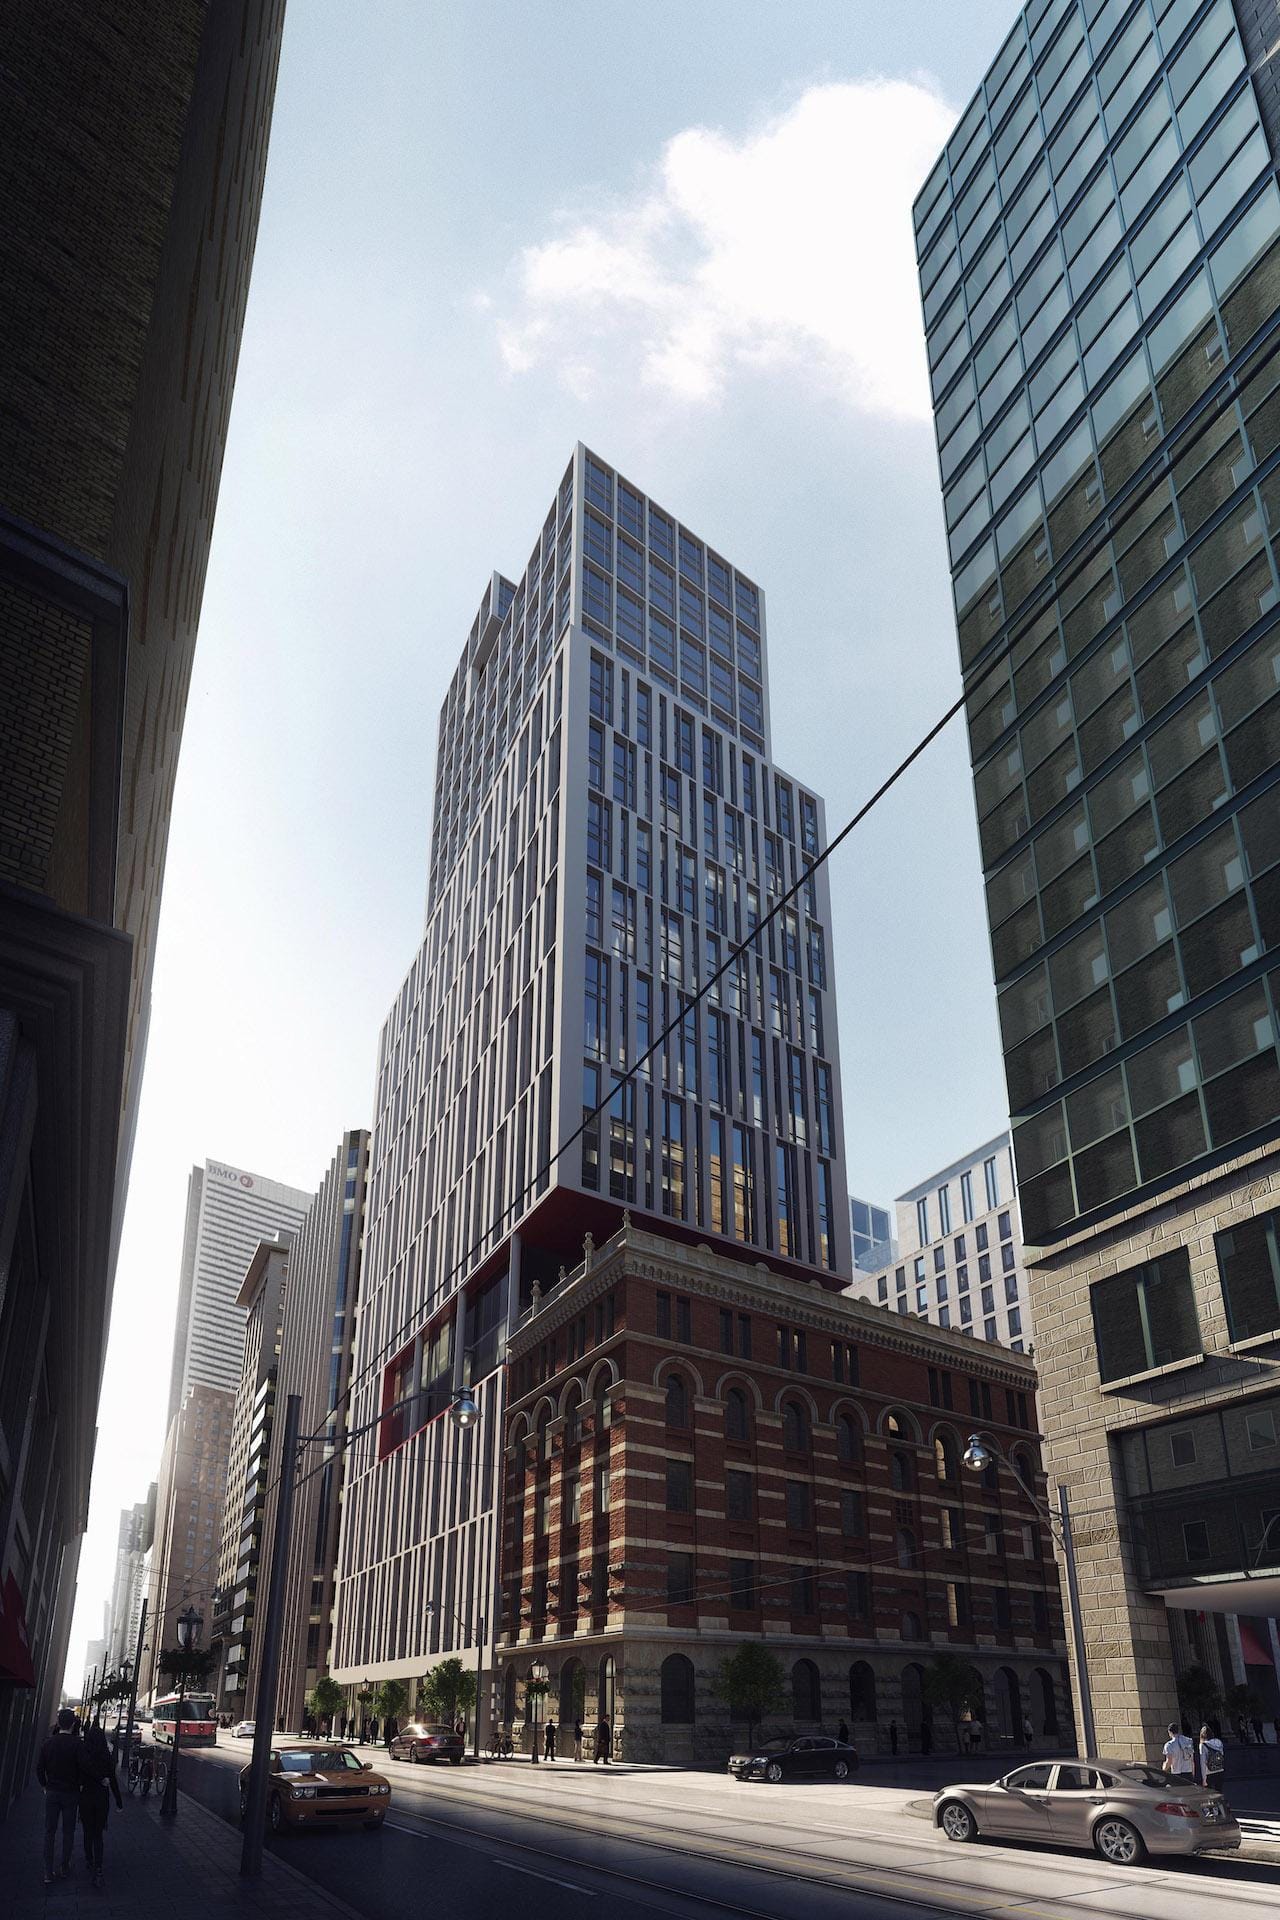 Full exterior rendering of 34 King Street East Condos during the day.